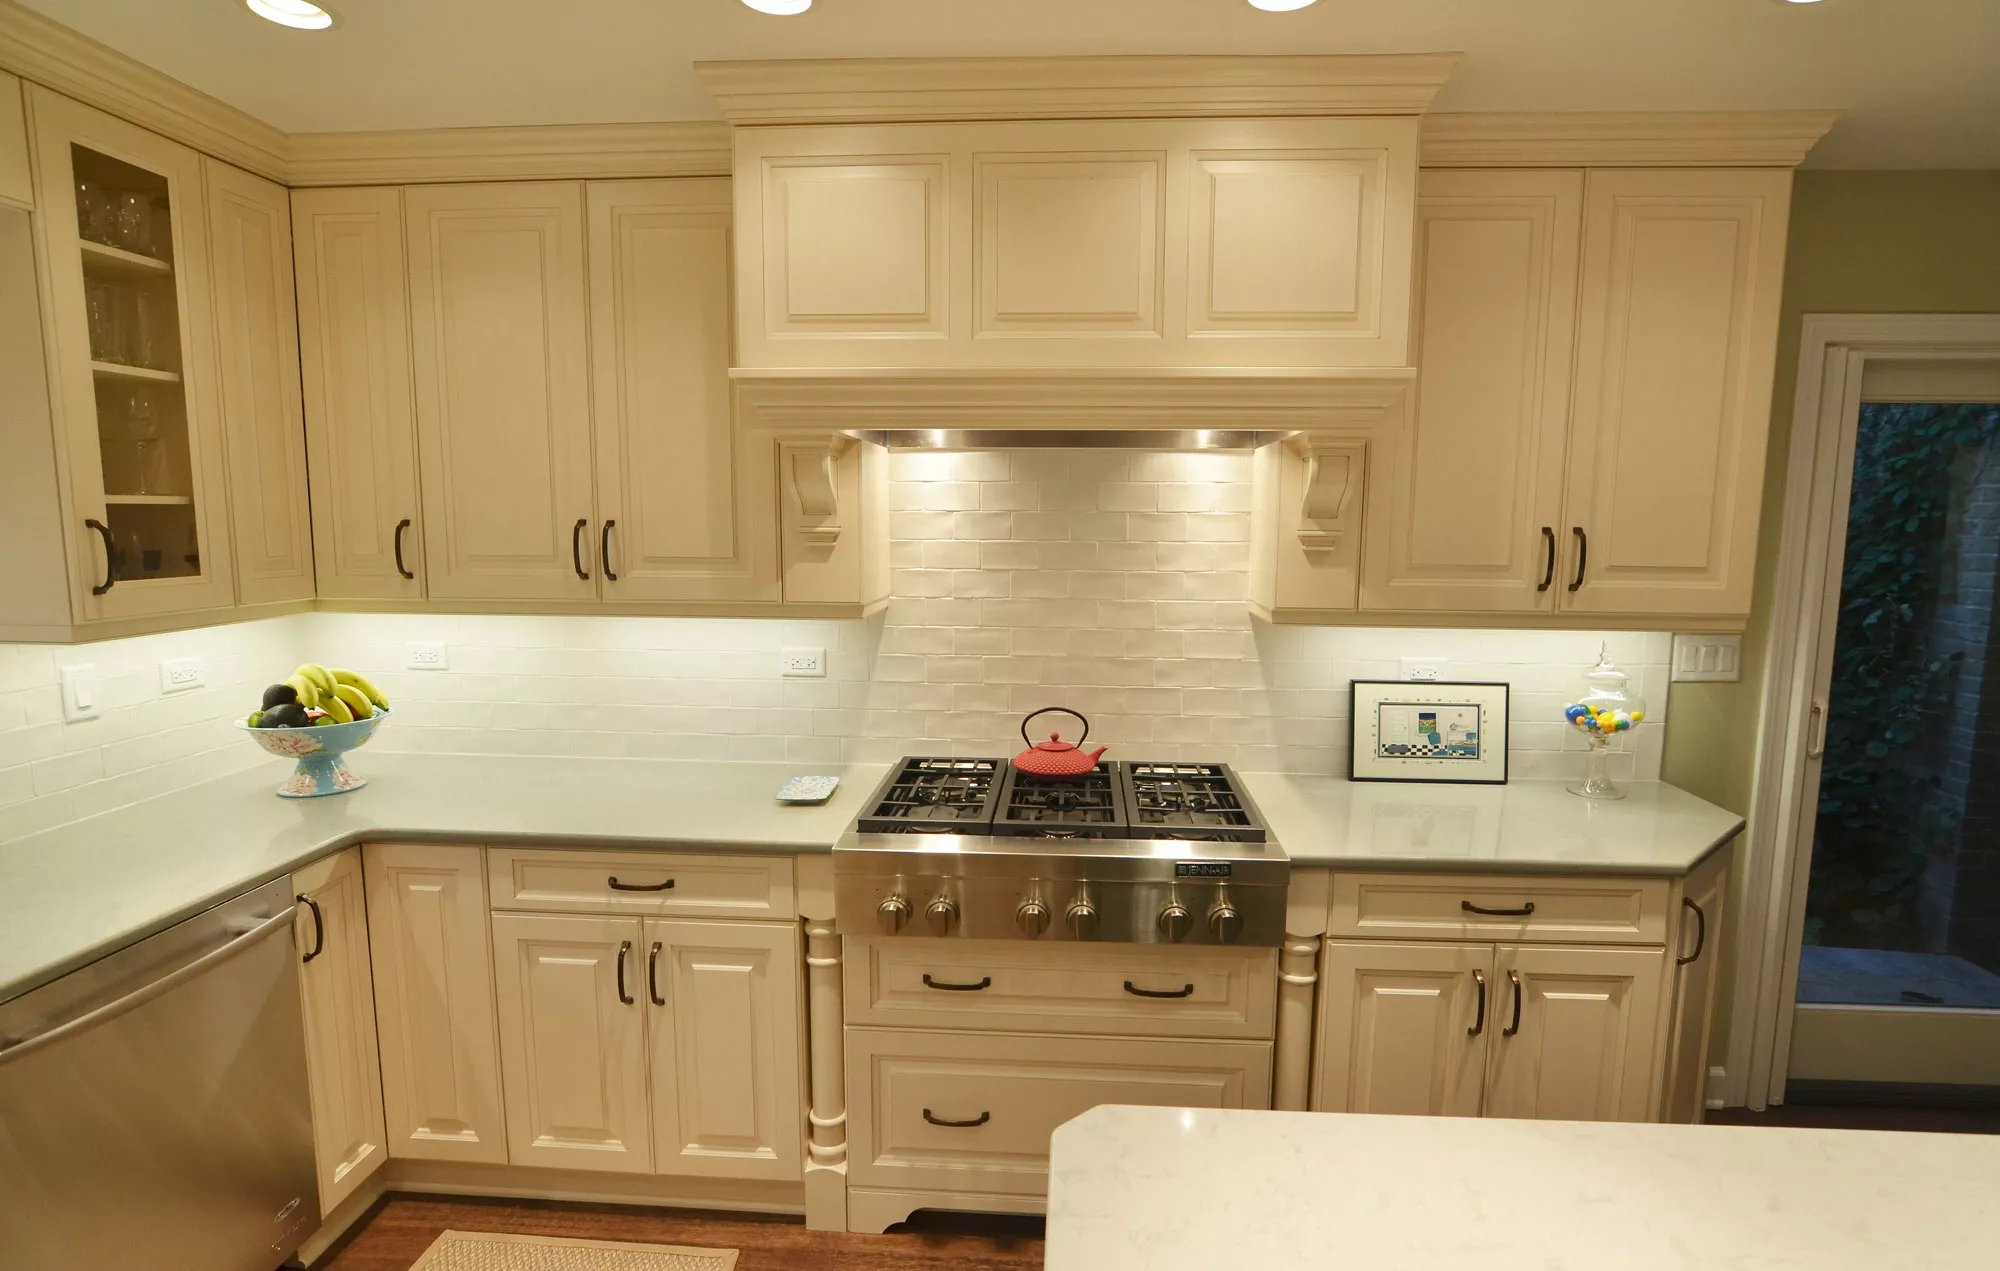 Kitchen remodeling in Naperville, IL. New kitchen stove area and redone counters and cabinets.